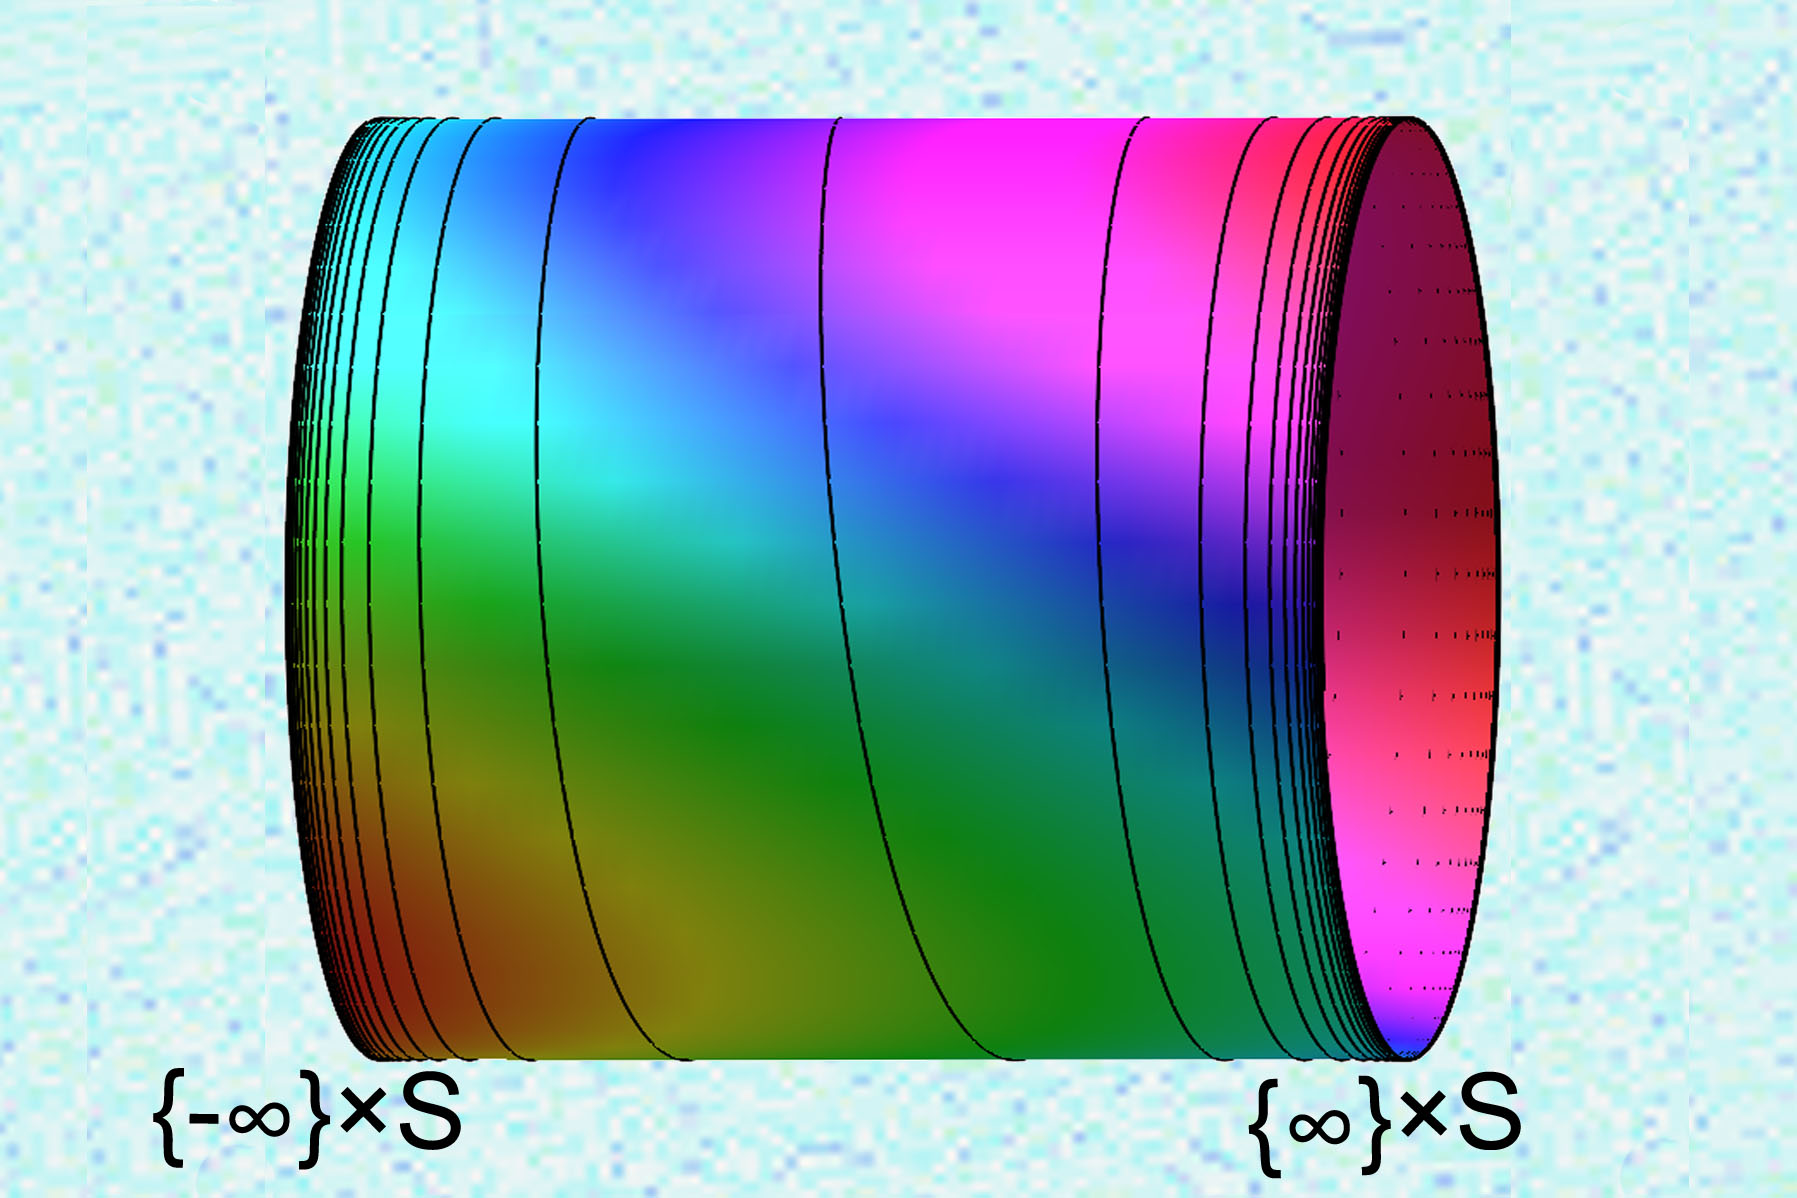 A 2-circle compactification of R